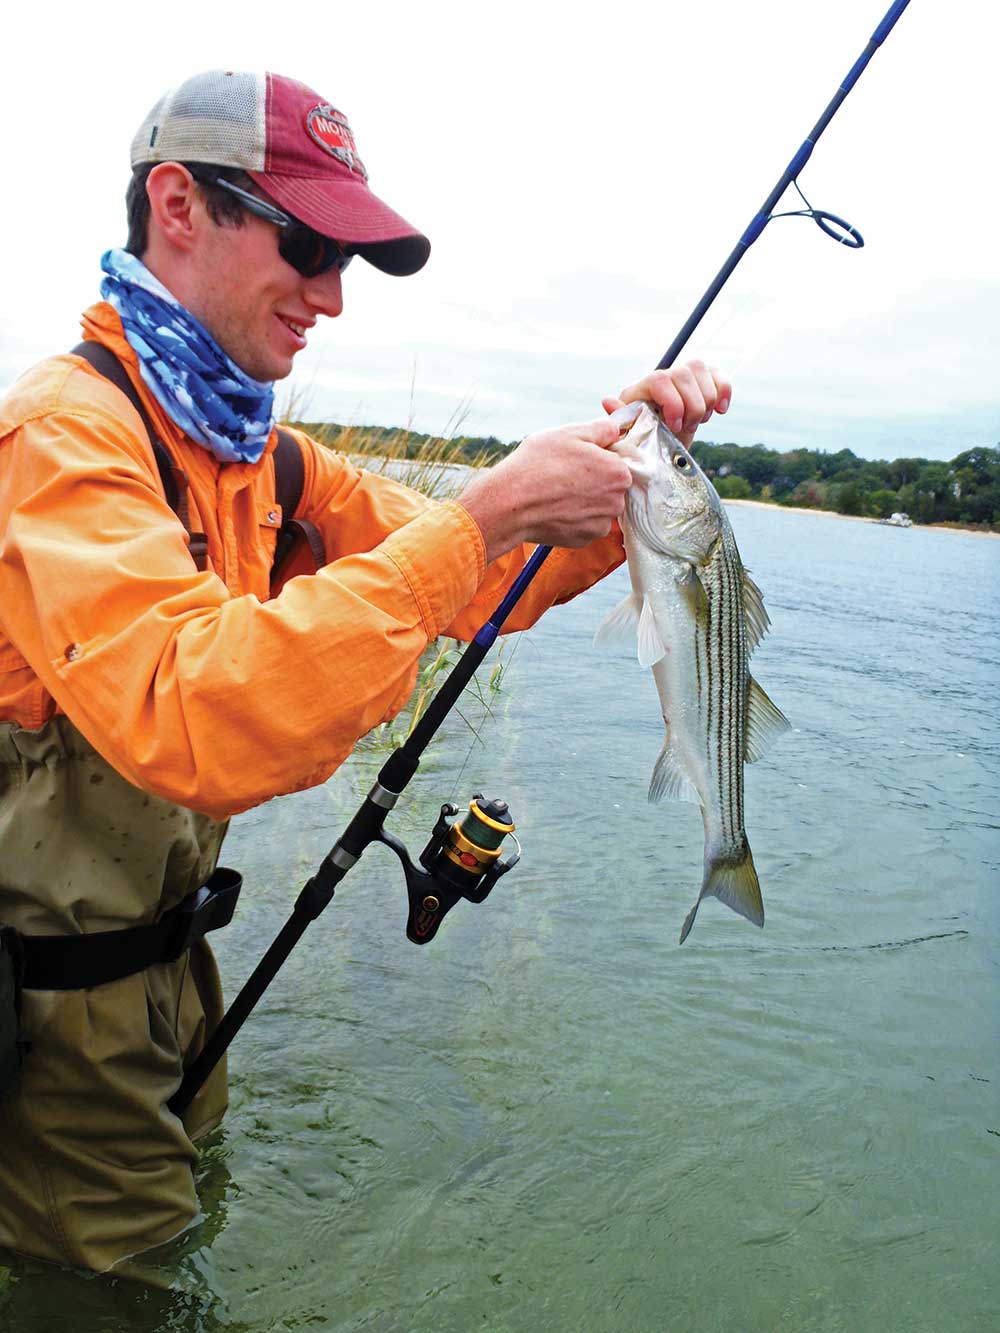 School stripers dominate early spring catches, but offer lots of fun on light tackle. 